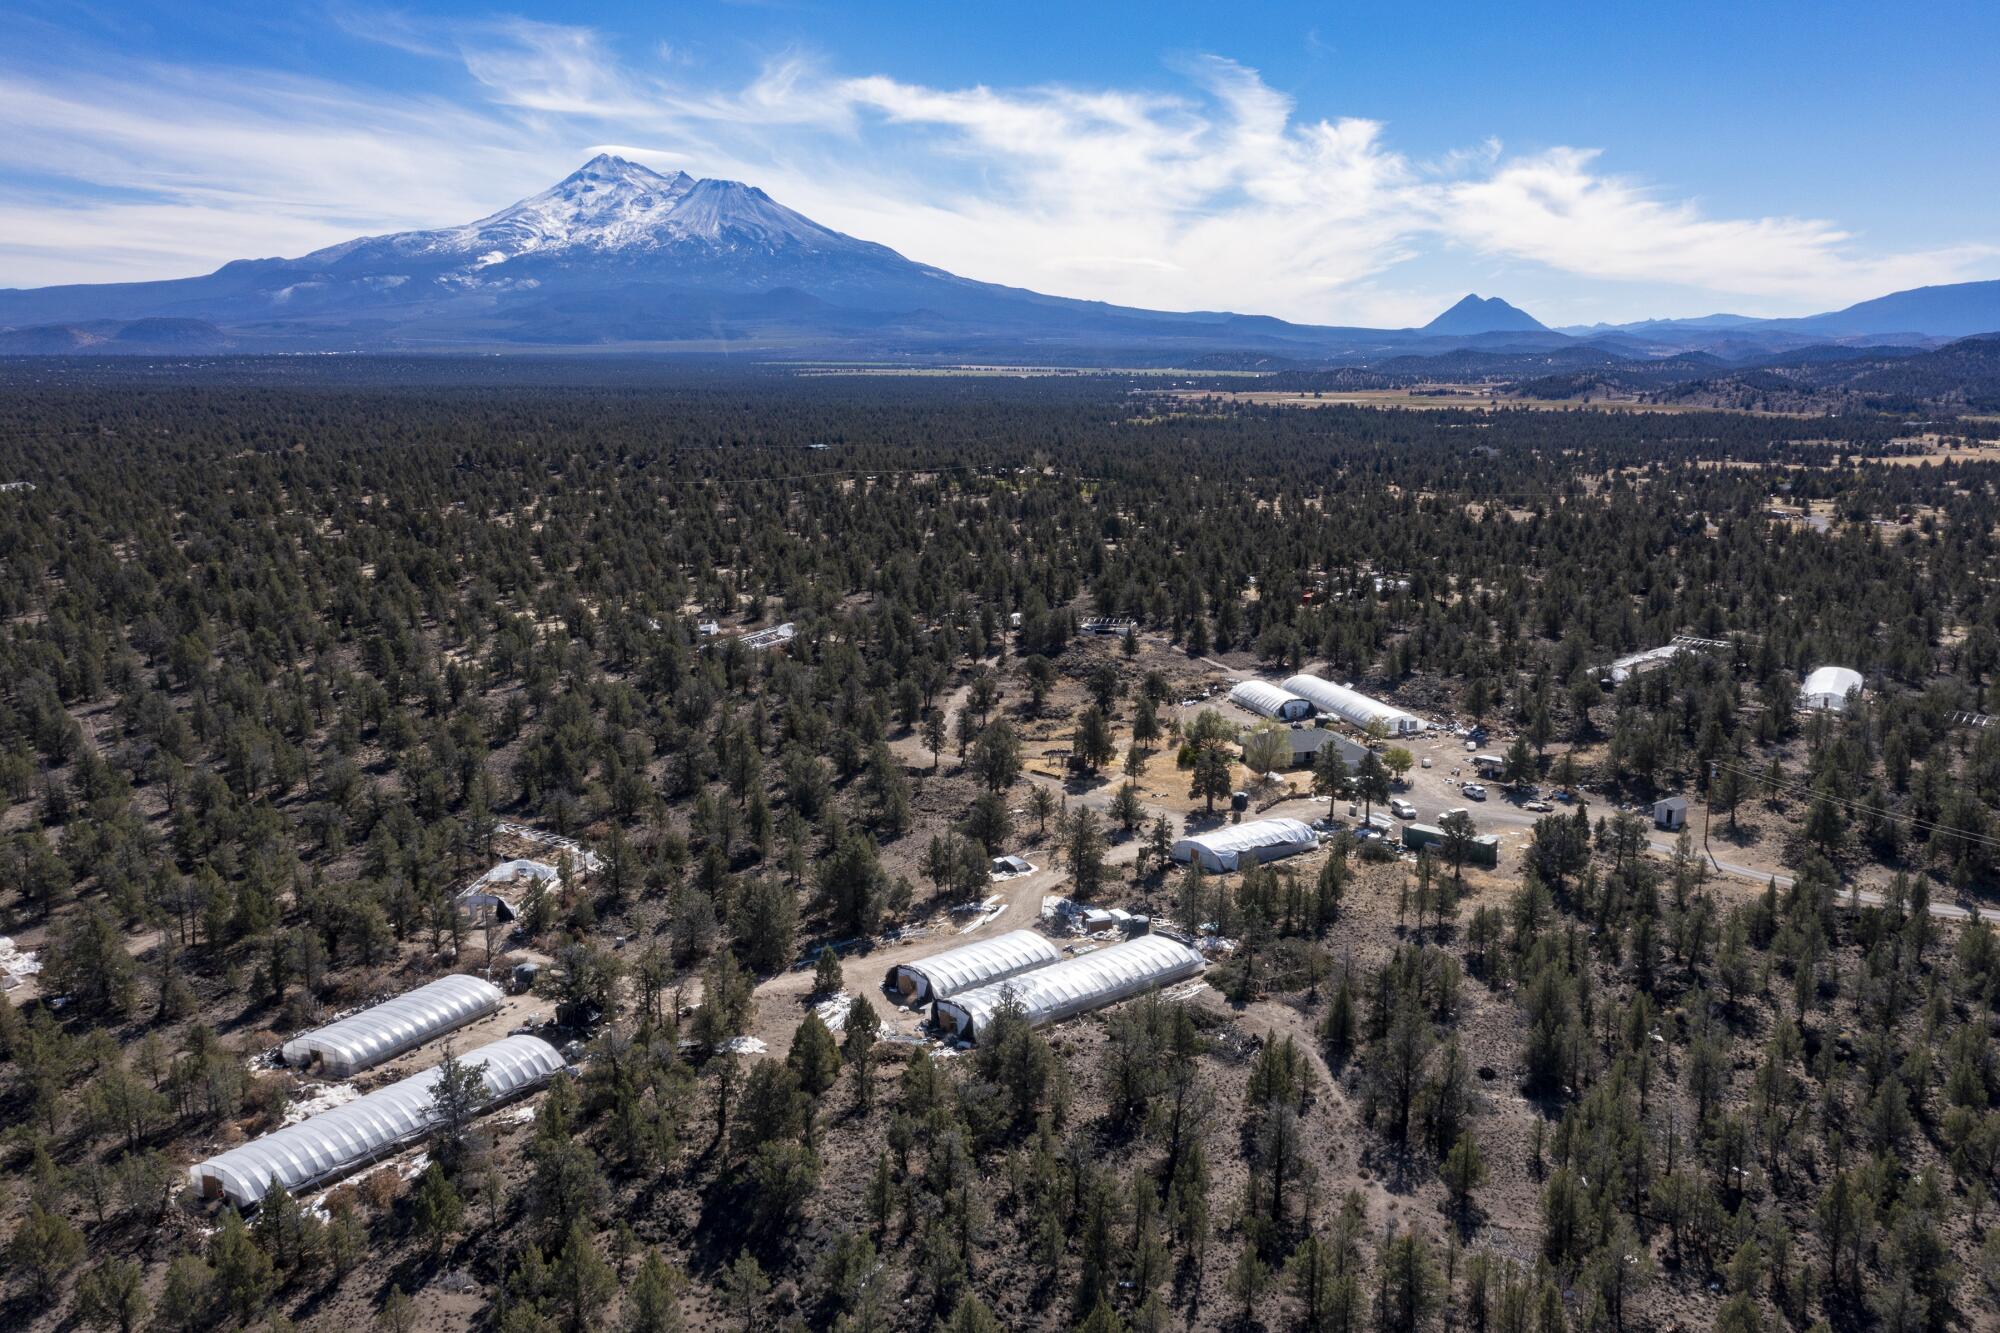 Mt. Shasta looms over greenhouses in Siskiyou County.